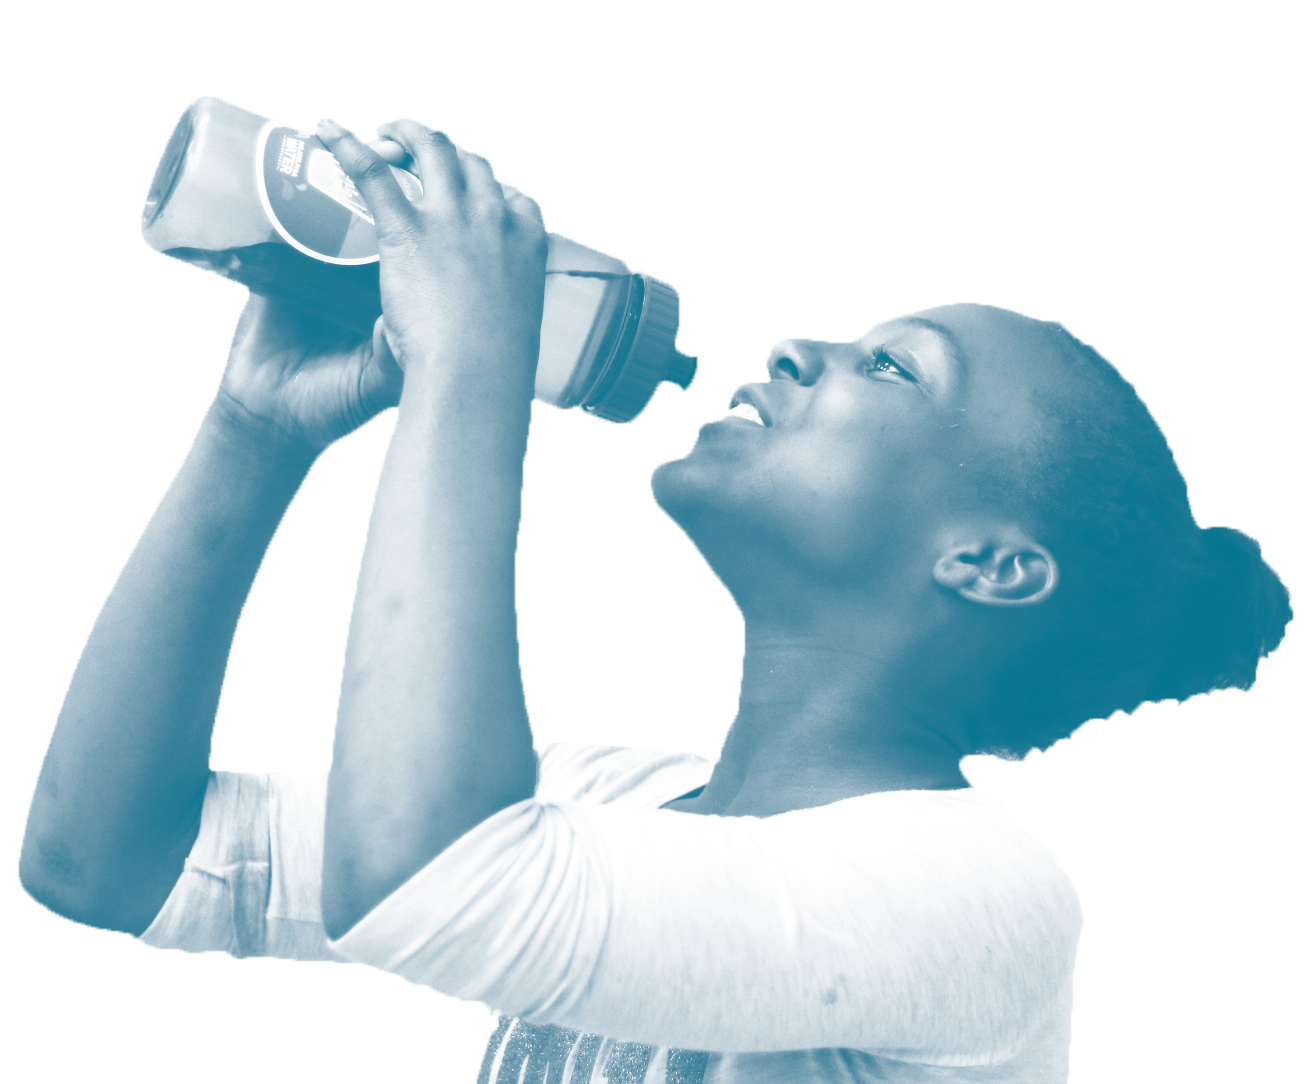 A young girl smiles as she holds up a reusable water bottle to take a drink. The bottle is transparent and has a sticker on the side, obscured by her hand. She has darker skin and dark curly hair, pulled up in a bun. The photo is grayscale, but tinted blue, with the background removed.